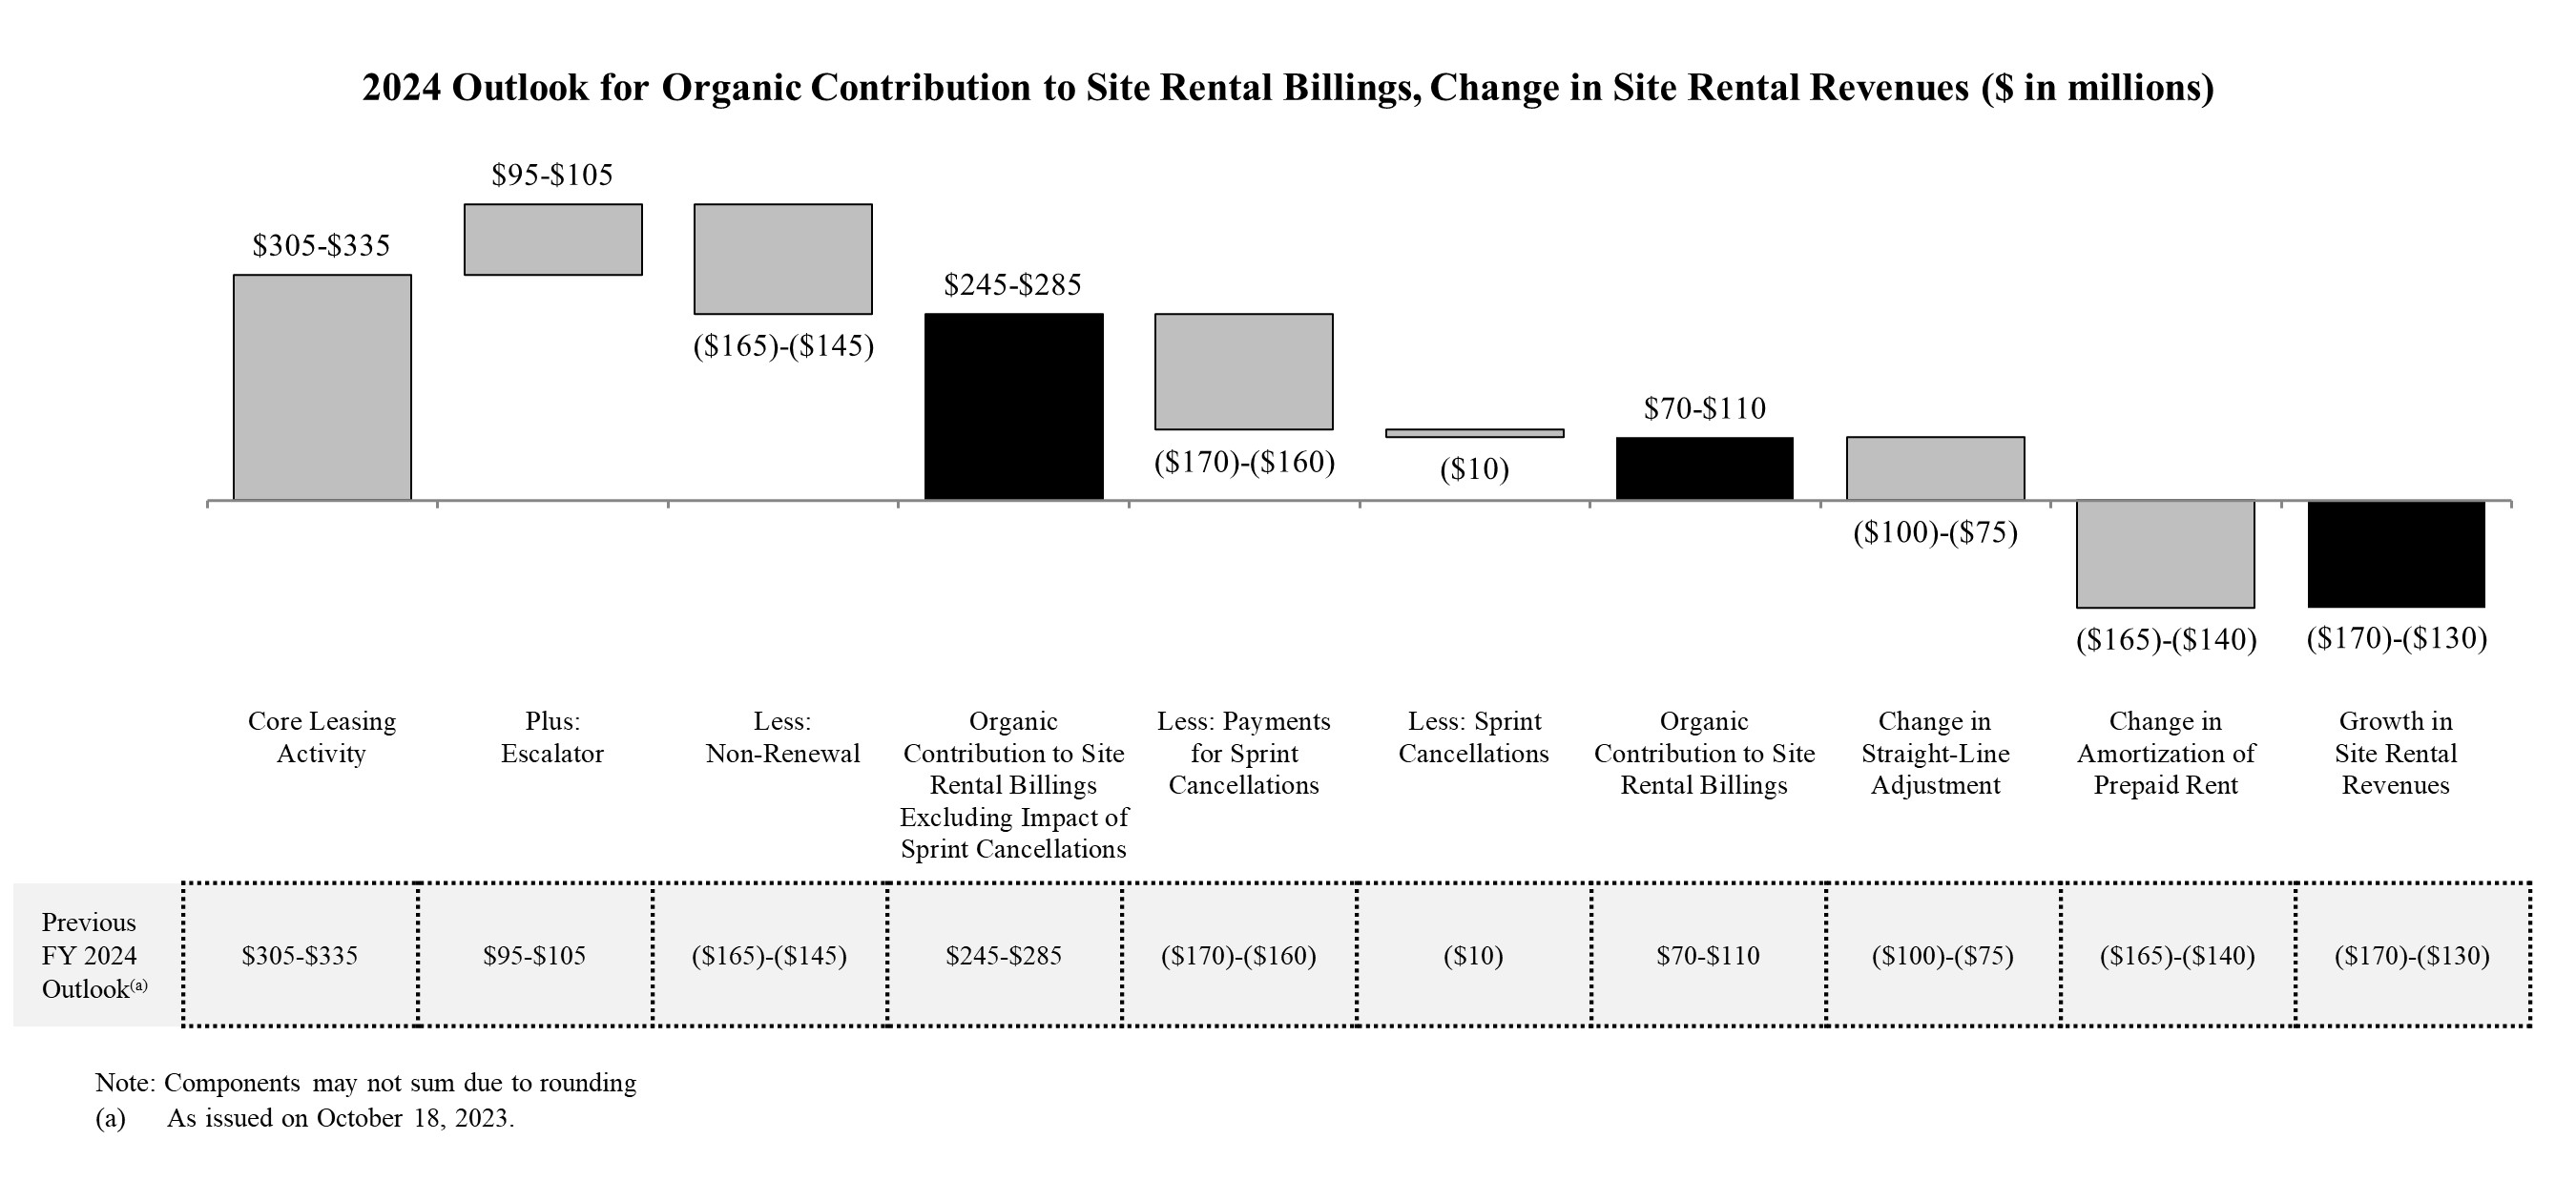 2024 Outlook for Organic Contribution to Site Rental Billings, Change in Site Rental Revenues ($ in millions)